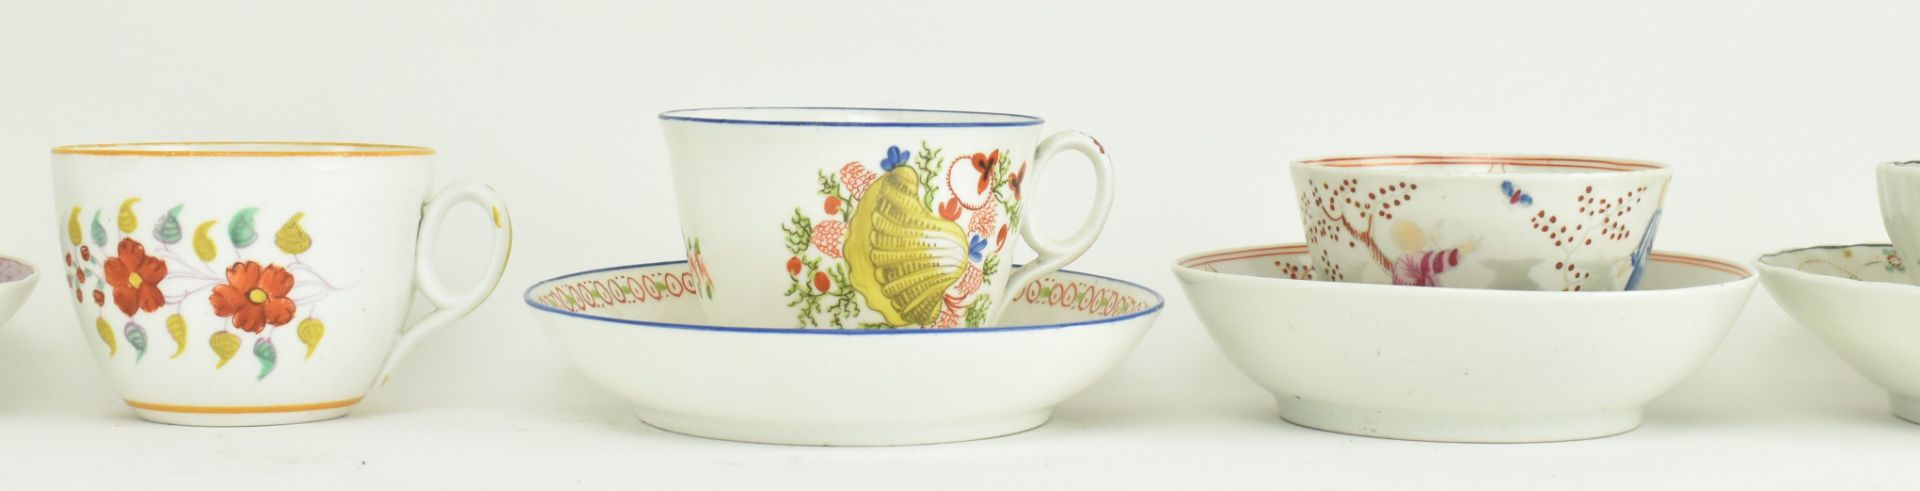 GROUP OF 18TH CENTURY NEWHALL PORCELAIN CUPS AND SAUCERS - Image 4 of 7